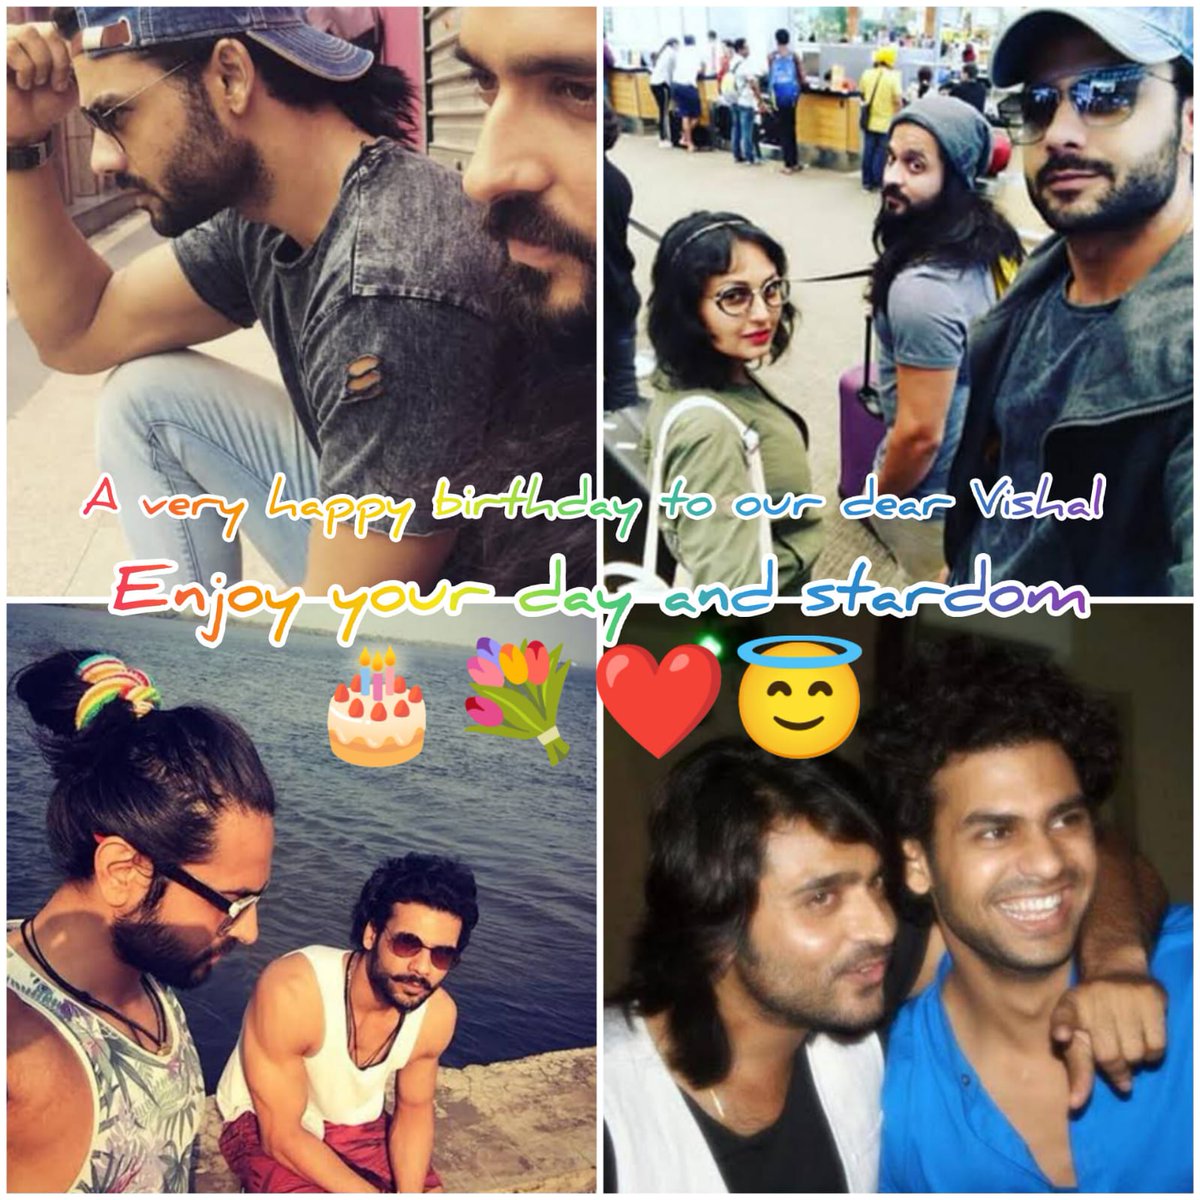 There's no doubt that your talent and your utmost grounded nature have made you reach this far ! 
Take love ❤️😇  
Happy Birthday Trending Hero 🎂🎉 

#VishalAdityaSingh #HappyBirthdayVishalAdityaSingh 
#ChandJalneLaga 
@vishalsingh713 

HBD VISHAL ADITYA SINGH